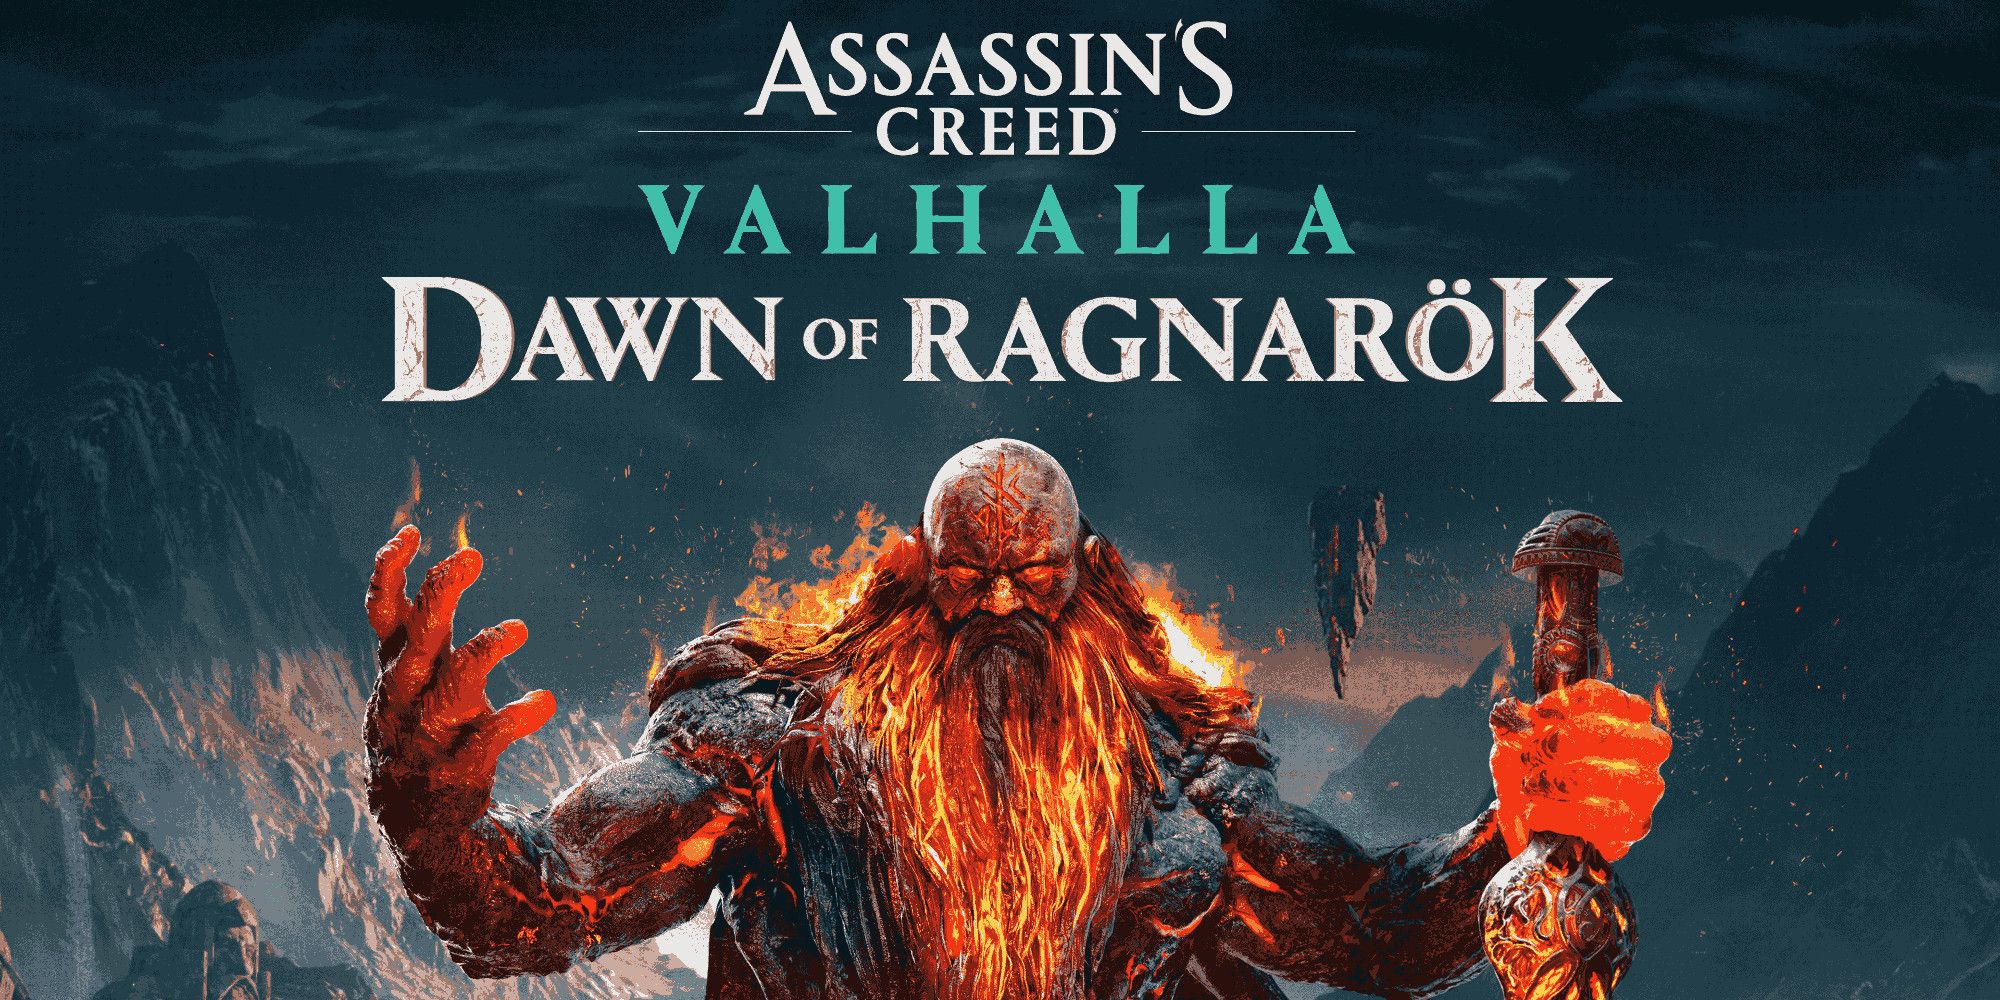 Assassin's Creed Valhalla Dawn of Ragnarok cover art showing a flaming figure.